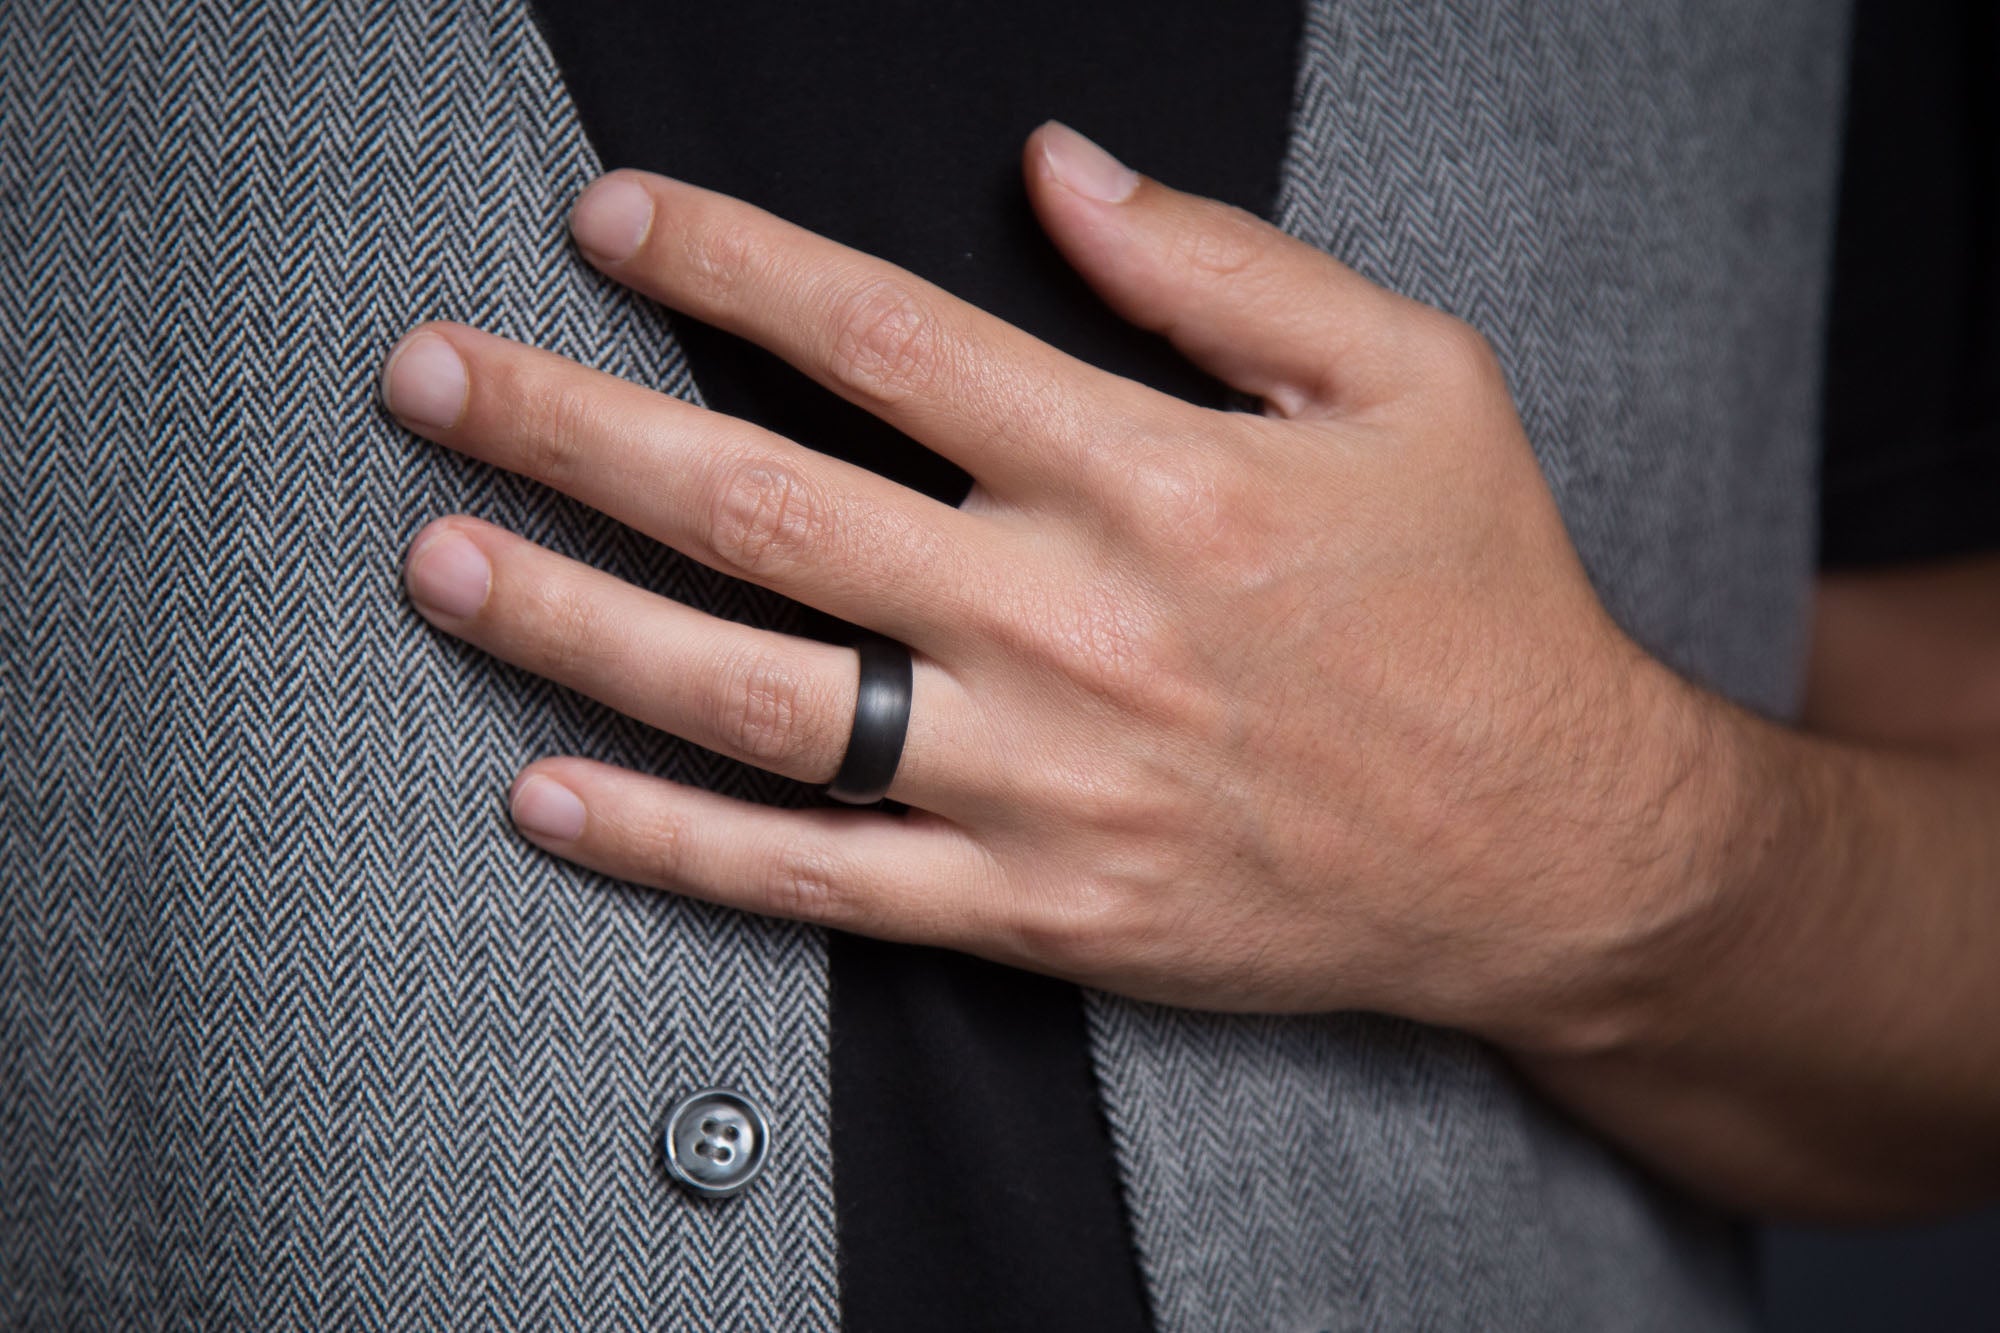 Rounded carbon fiber ring